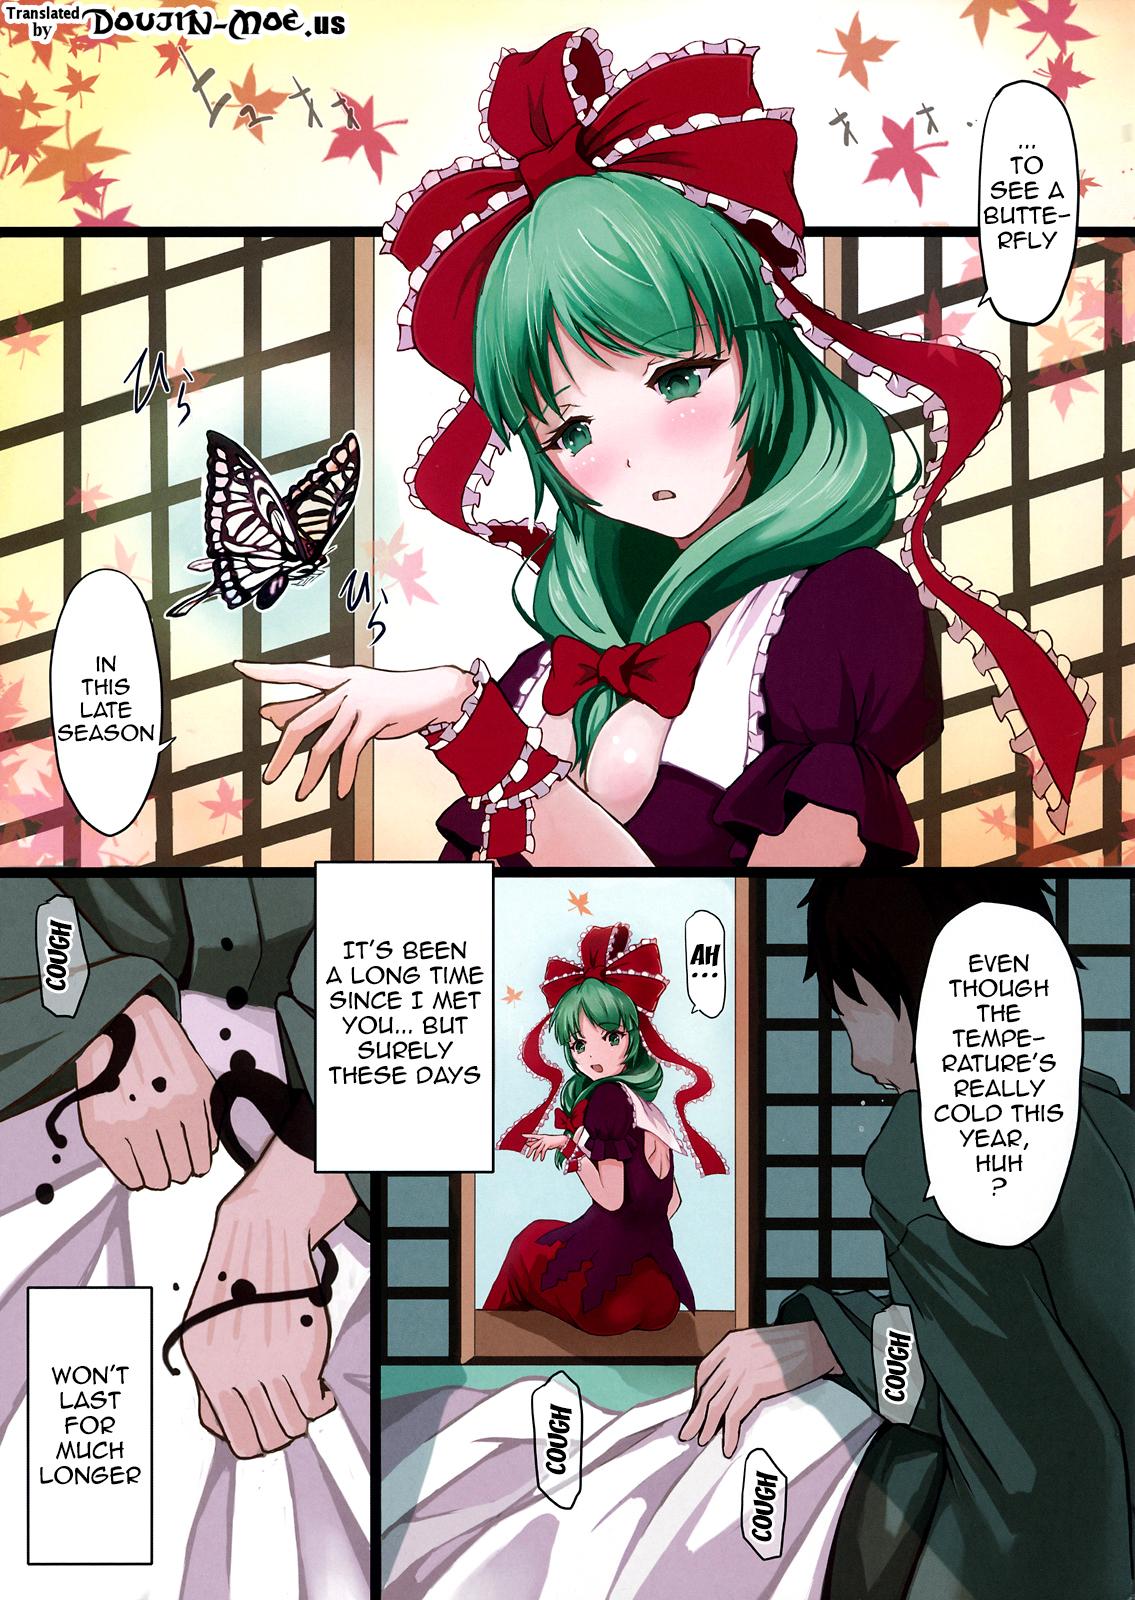 Missionary The End of Dream - Touhou project Spying - Page 2